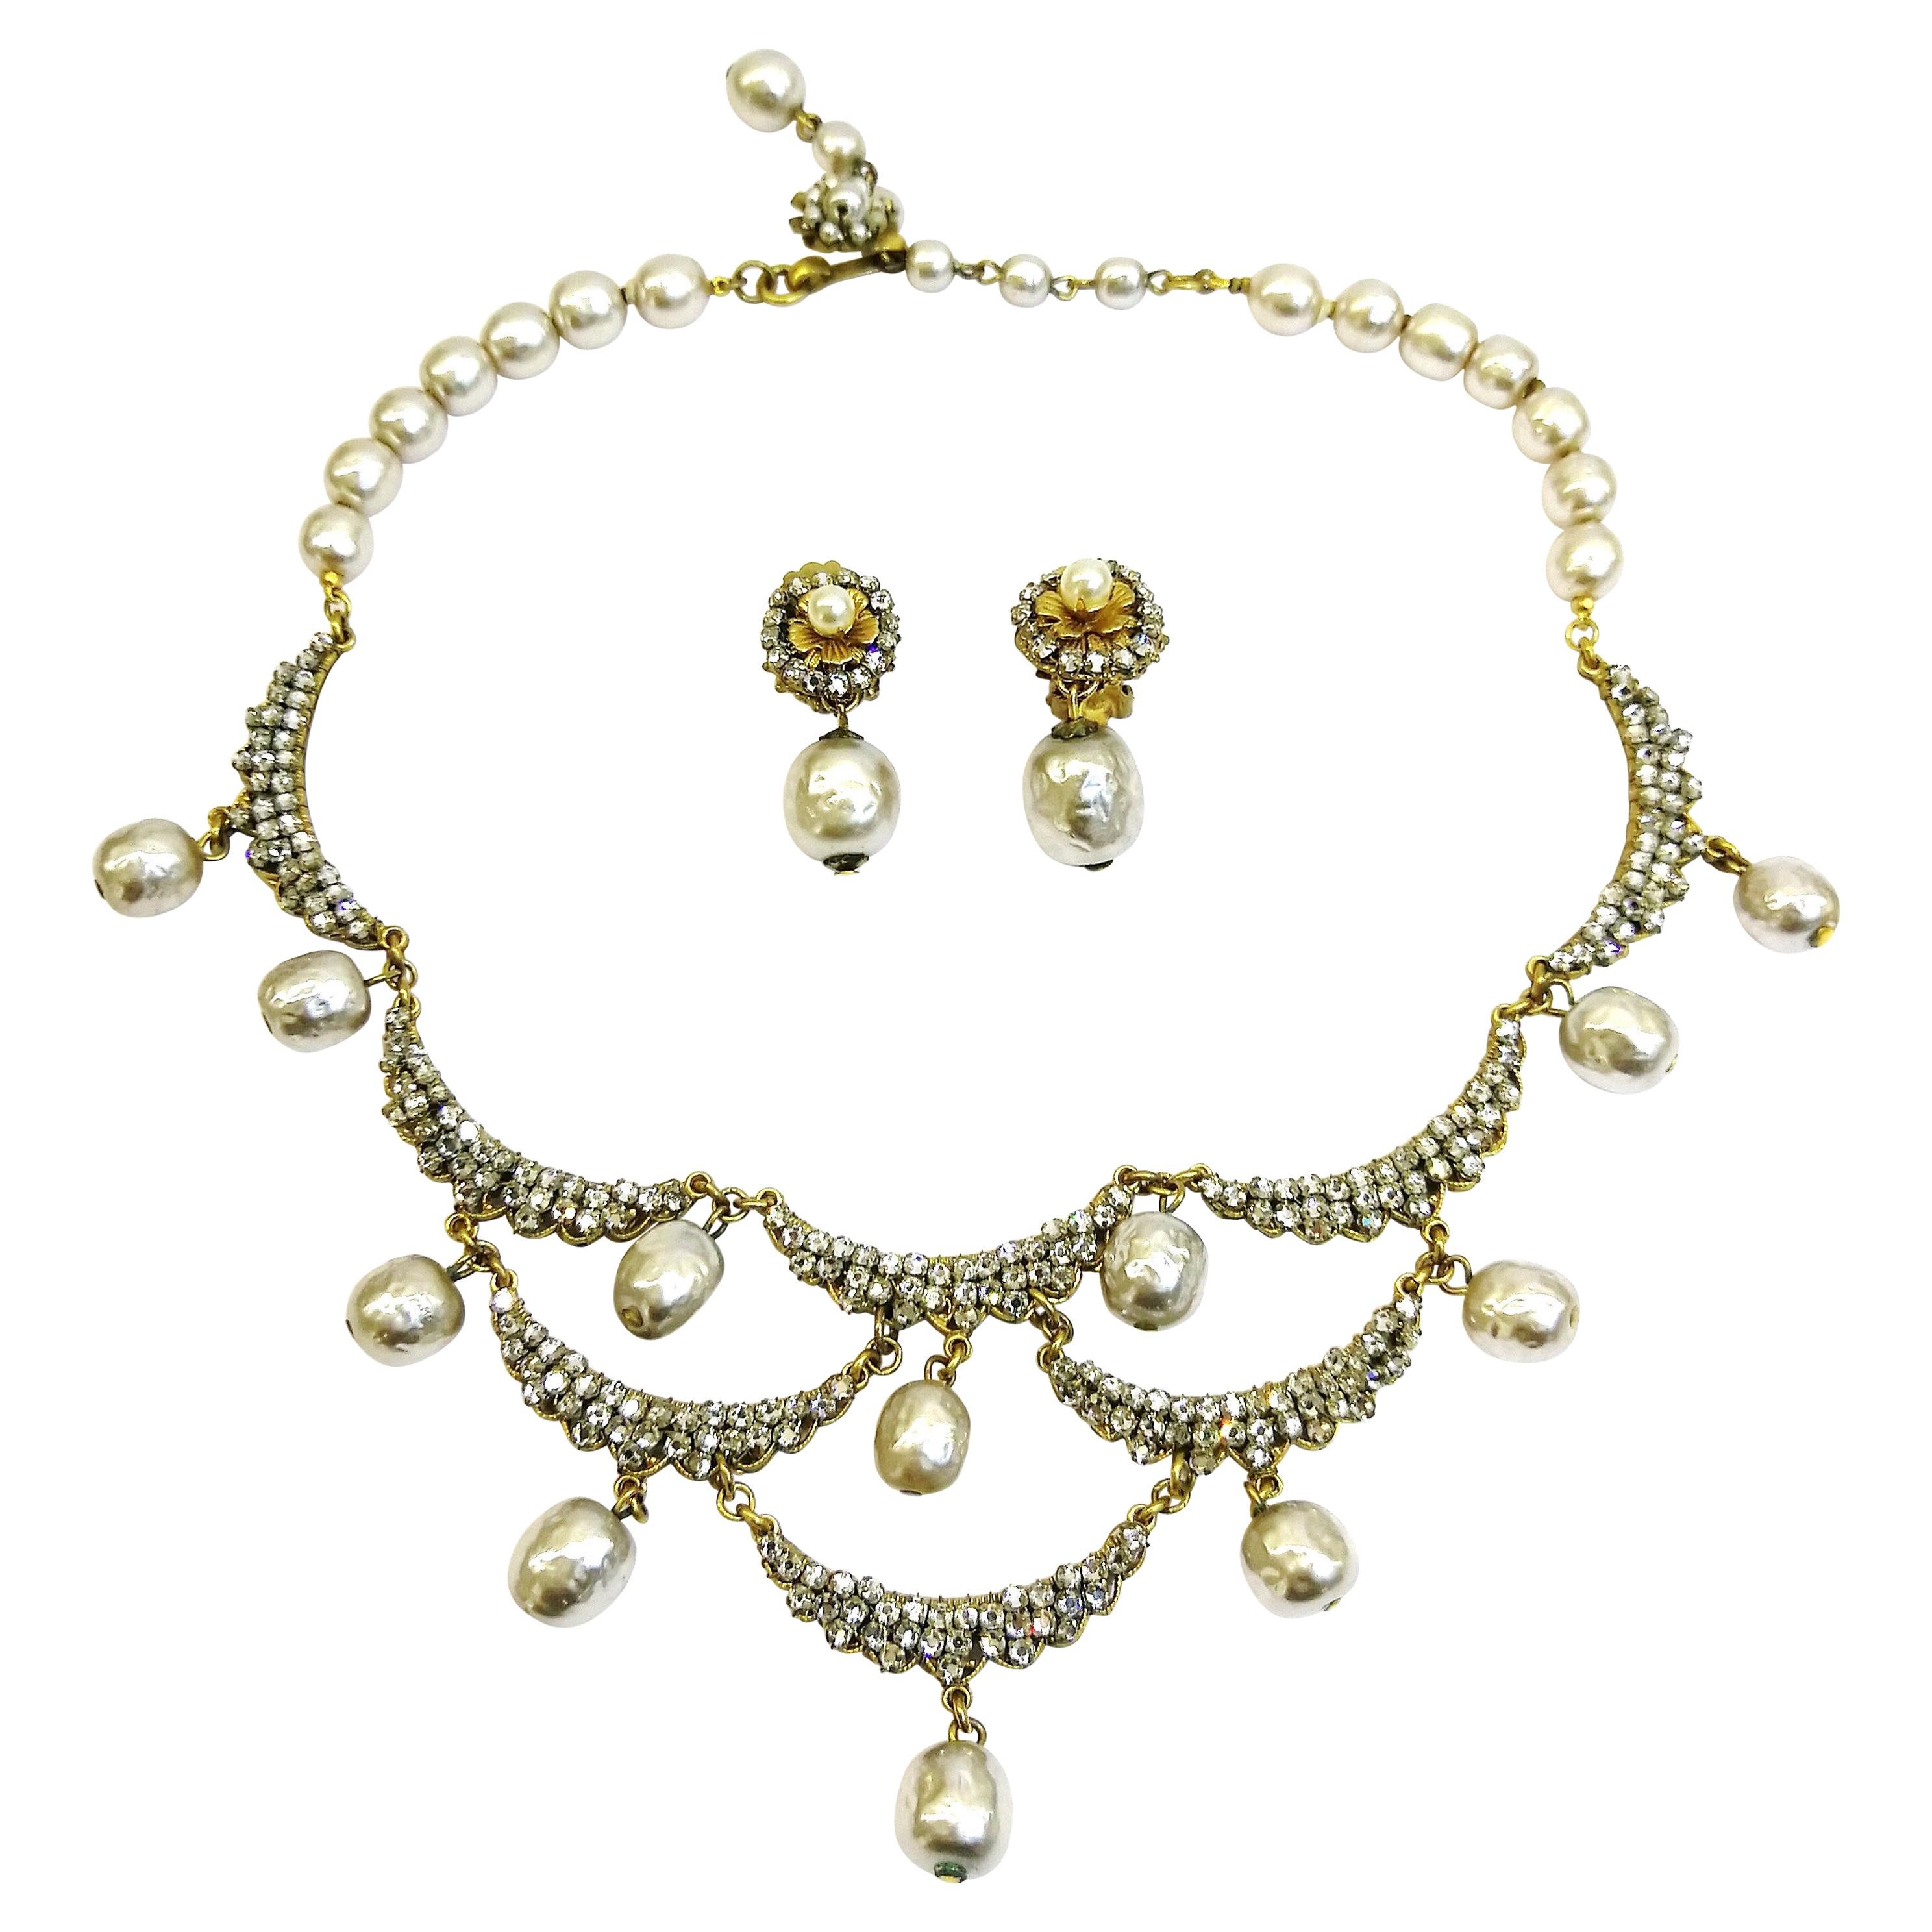 A necklace and earrings of gilded metal, paste and baroque pearl, Miriam Haskell